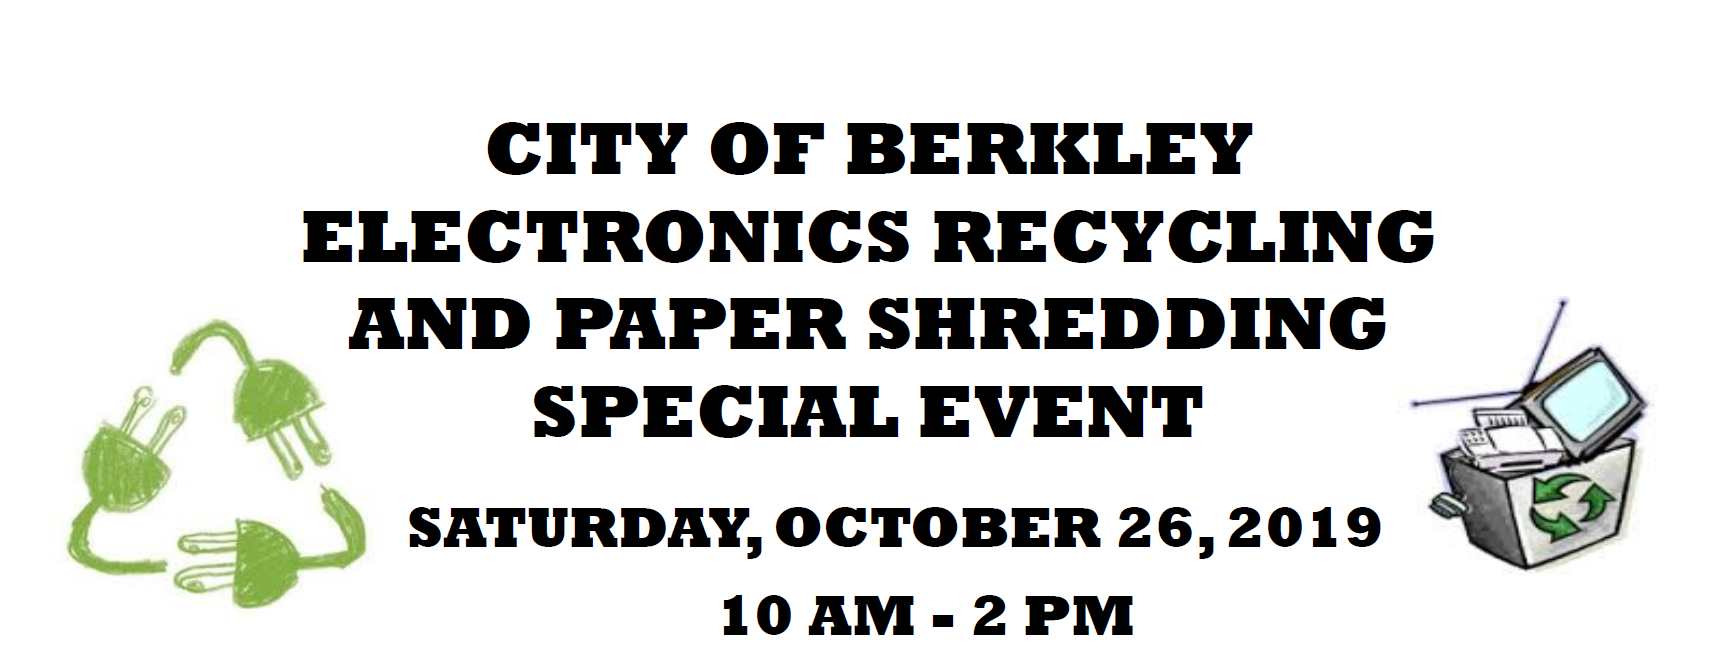 Berkley Electronic Recycling Event Header Graphic